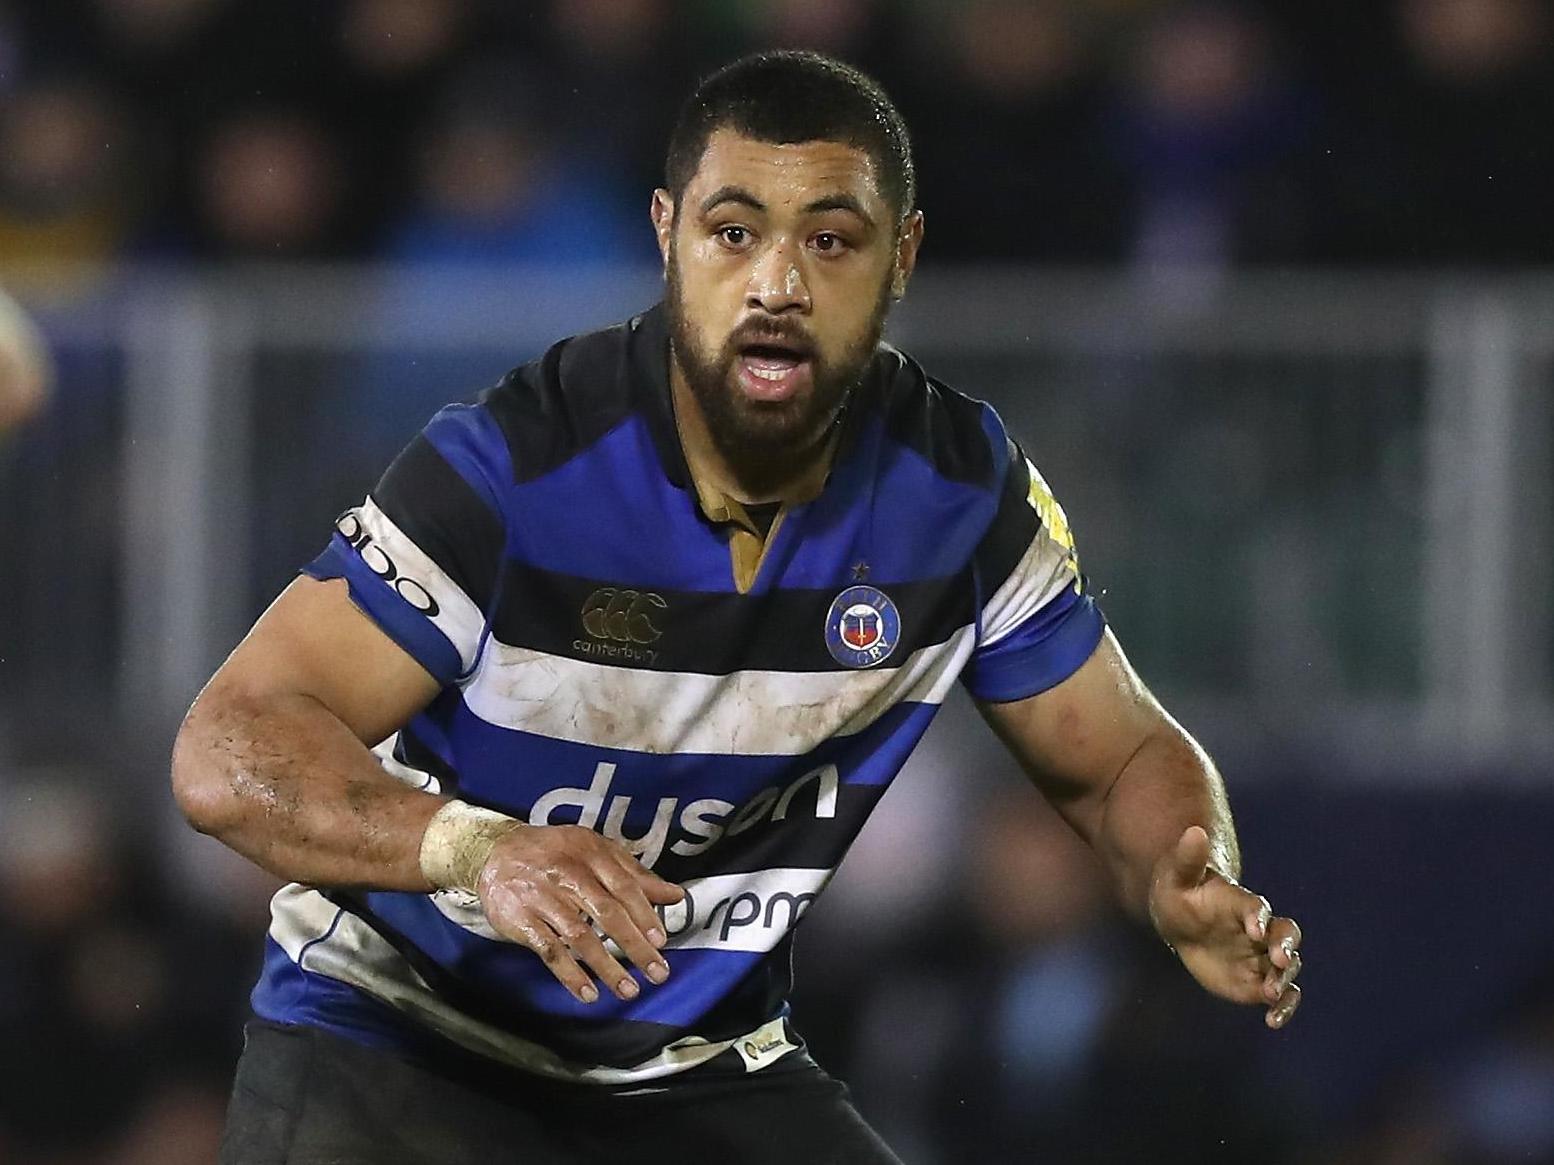 Following a medical assessment on Monday, the full extent of Faletau's latest injury was revealed